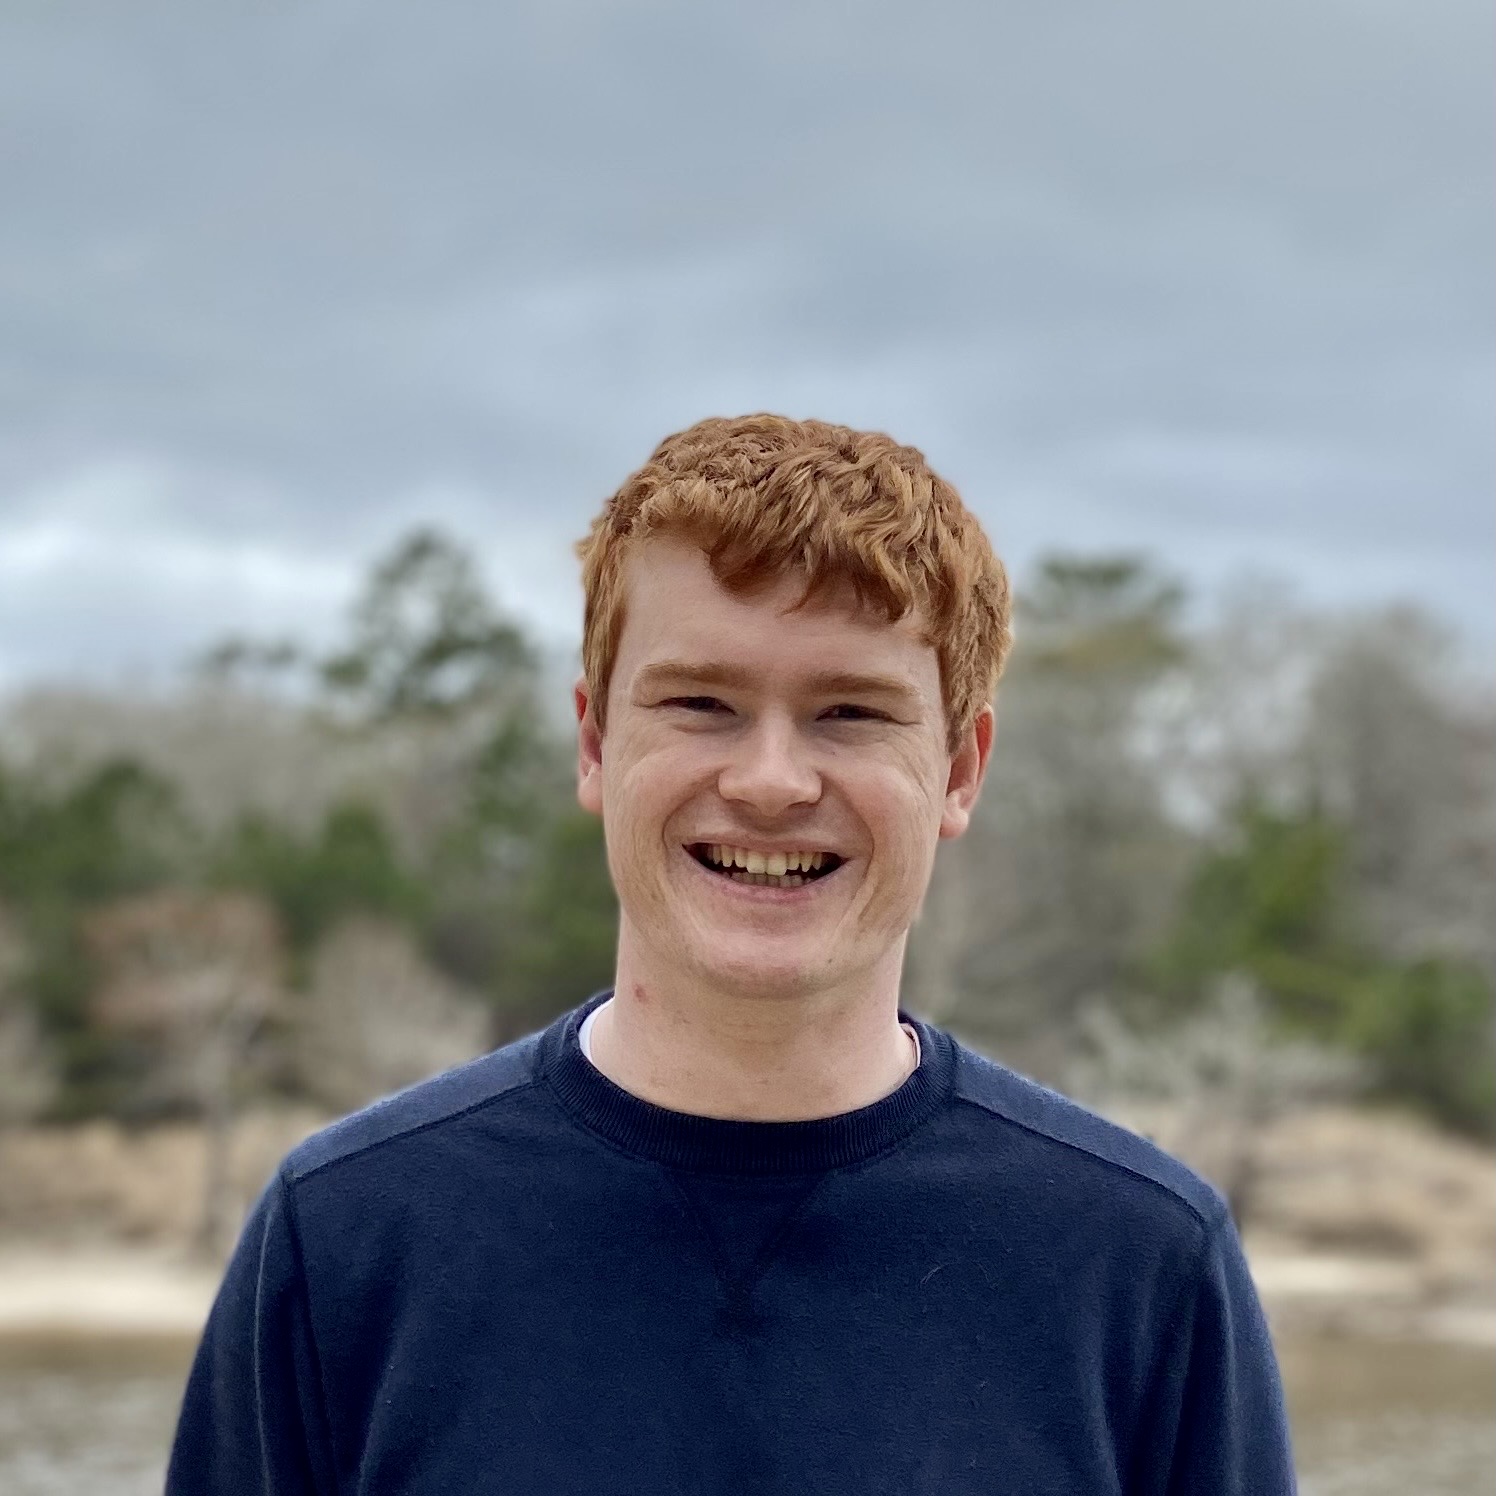 A smiling white male with short, red hair, standing in the center of the image, wearing a dark blue jumper.